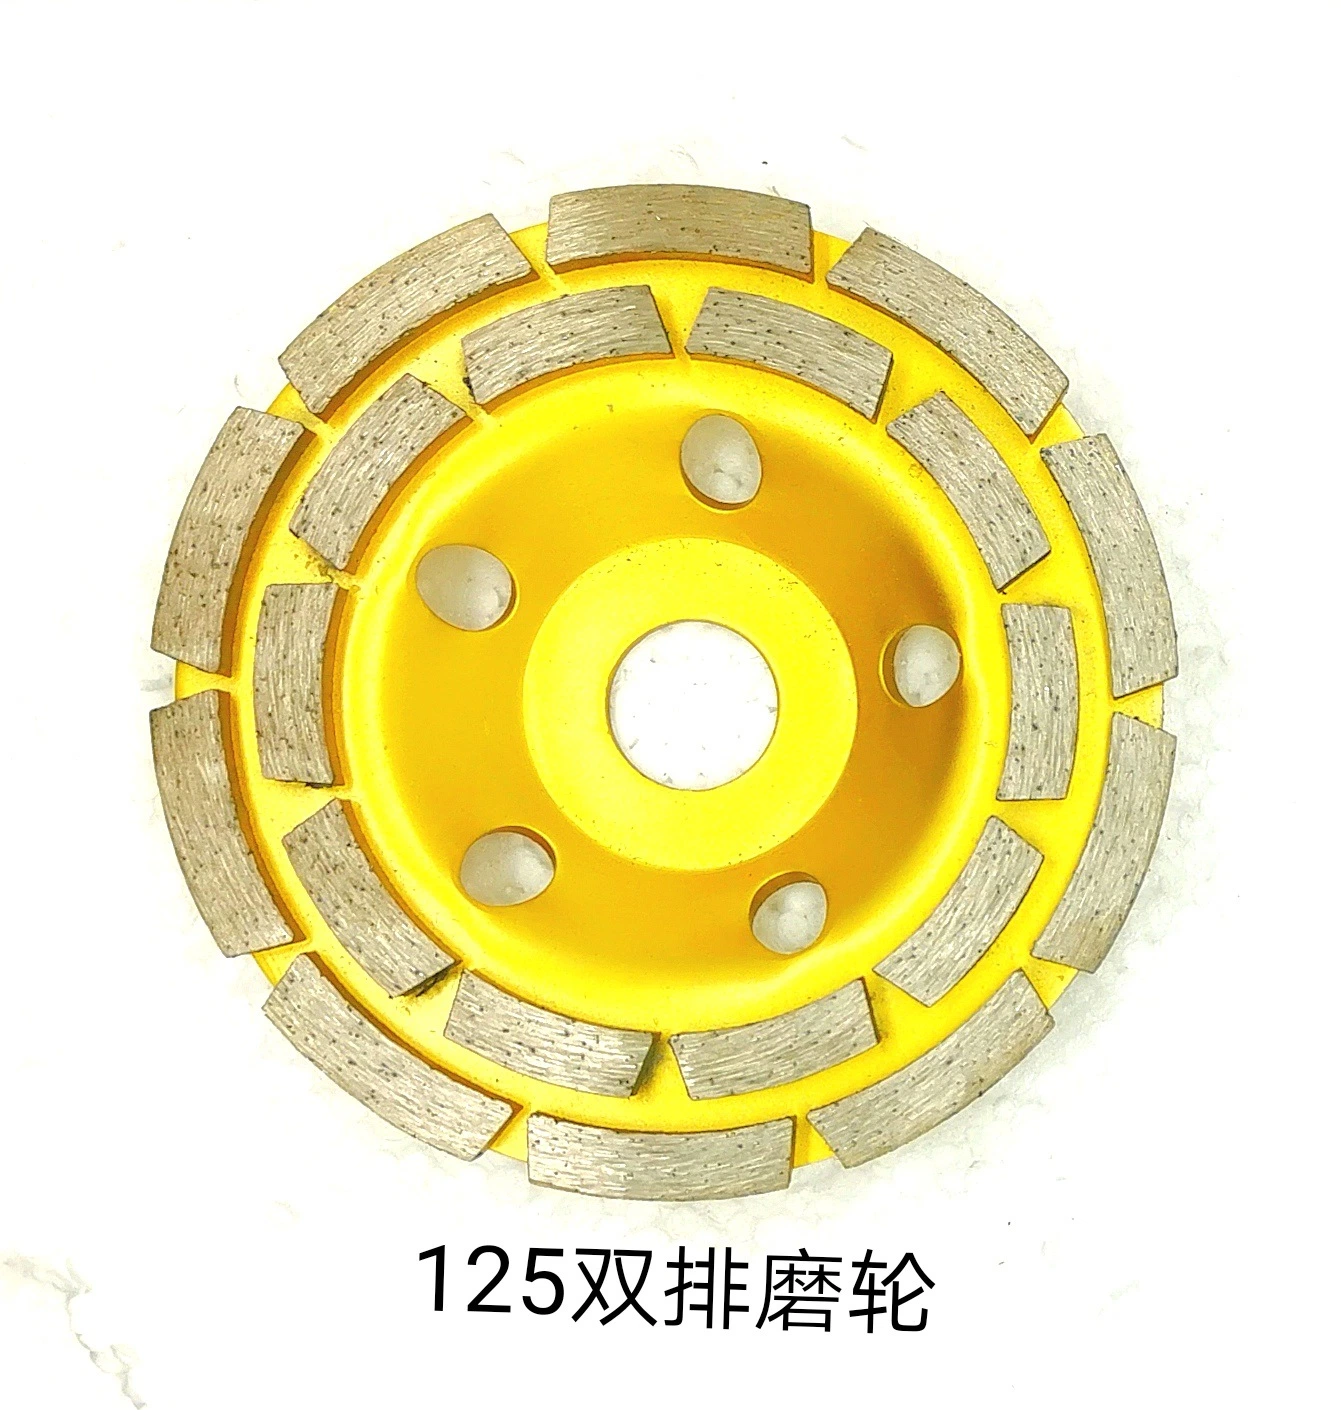 Continuous Turbo Diamond Granite Cup Cutting Grinding Wheel Disc Diamond Tools for Stone Marble Concrete